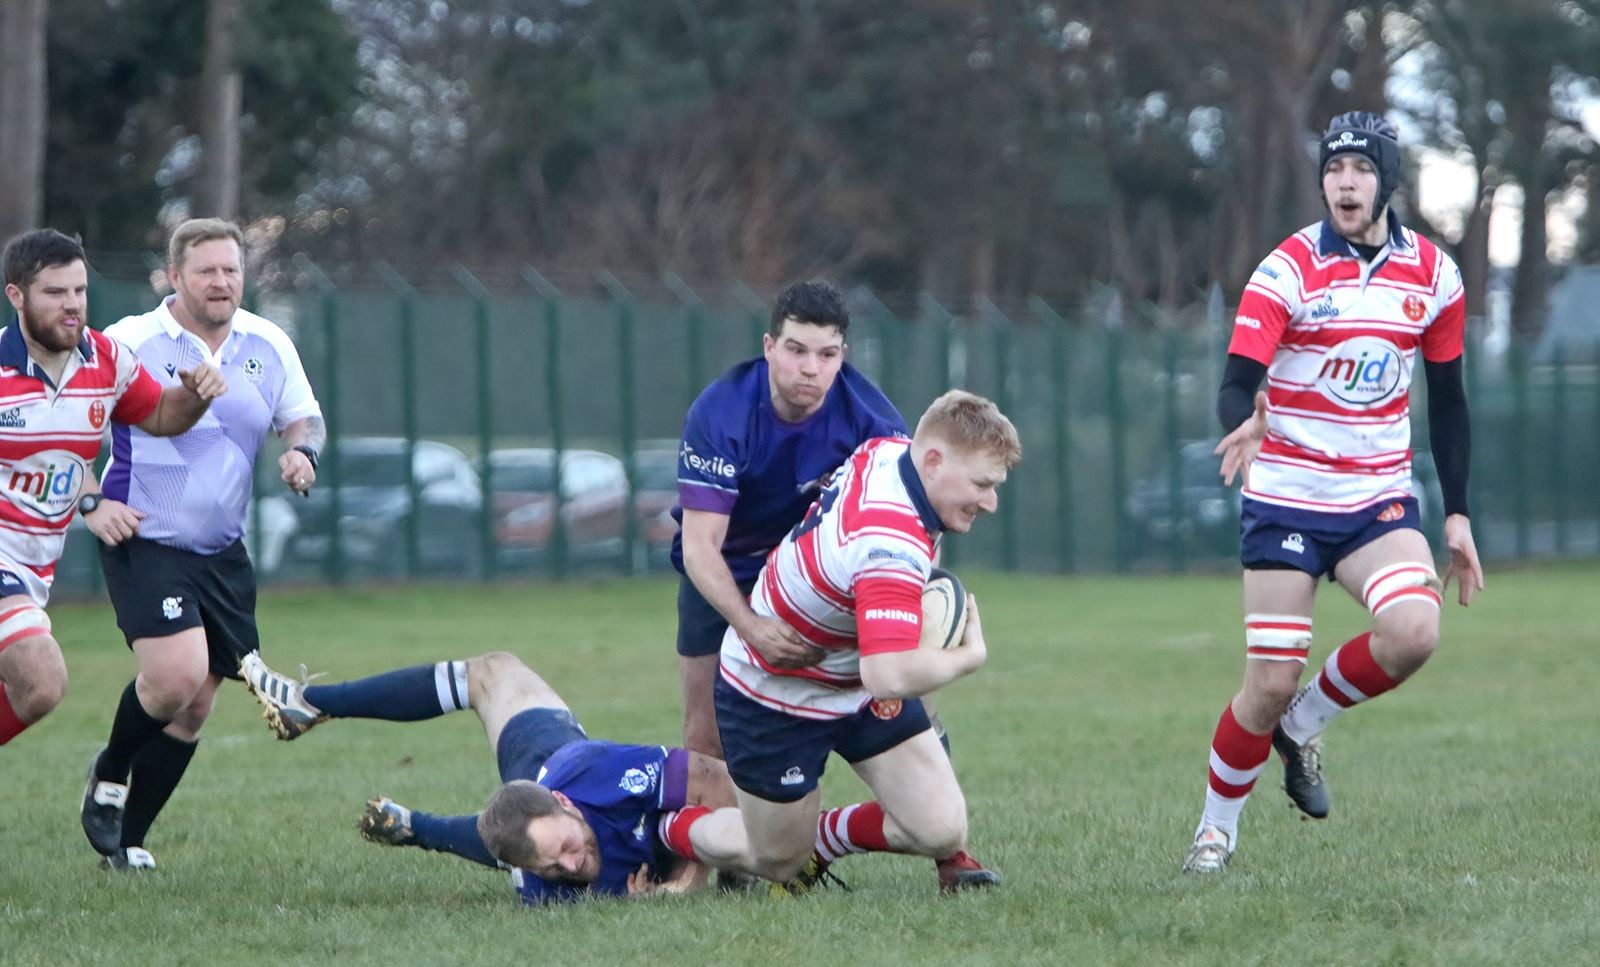 Moray's Ewan Simpson being tackled. In the background are Neil Alexander and Cameron Morrison Smith. Picture: John MacGregor